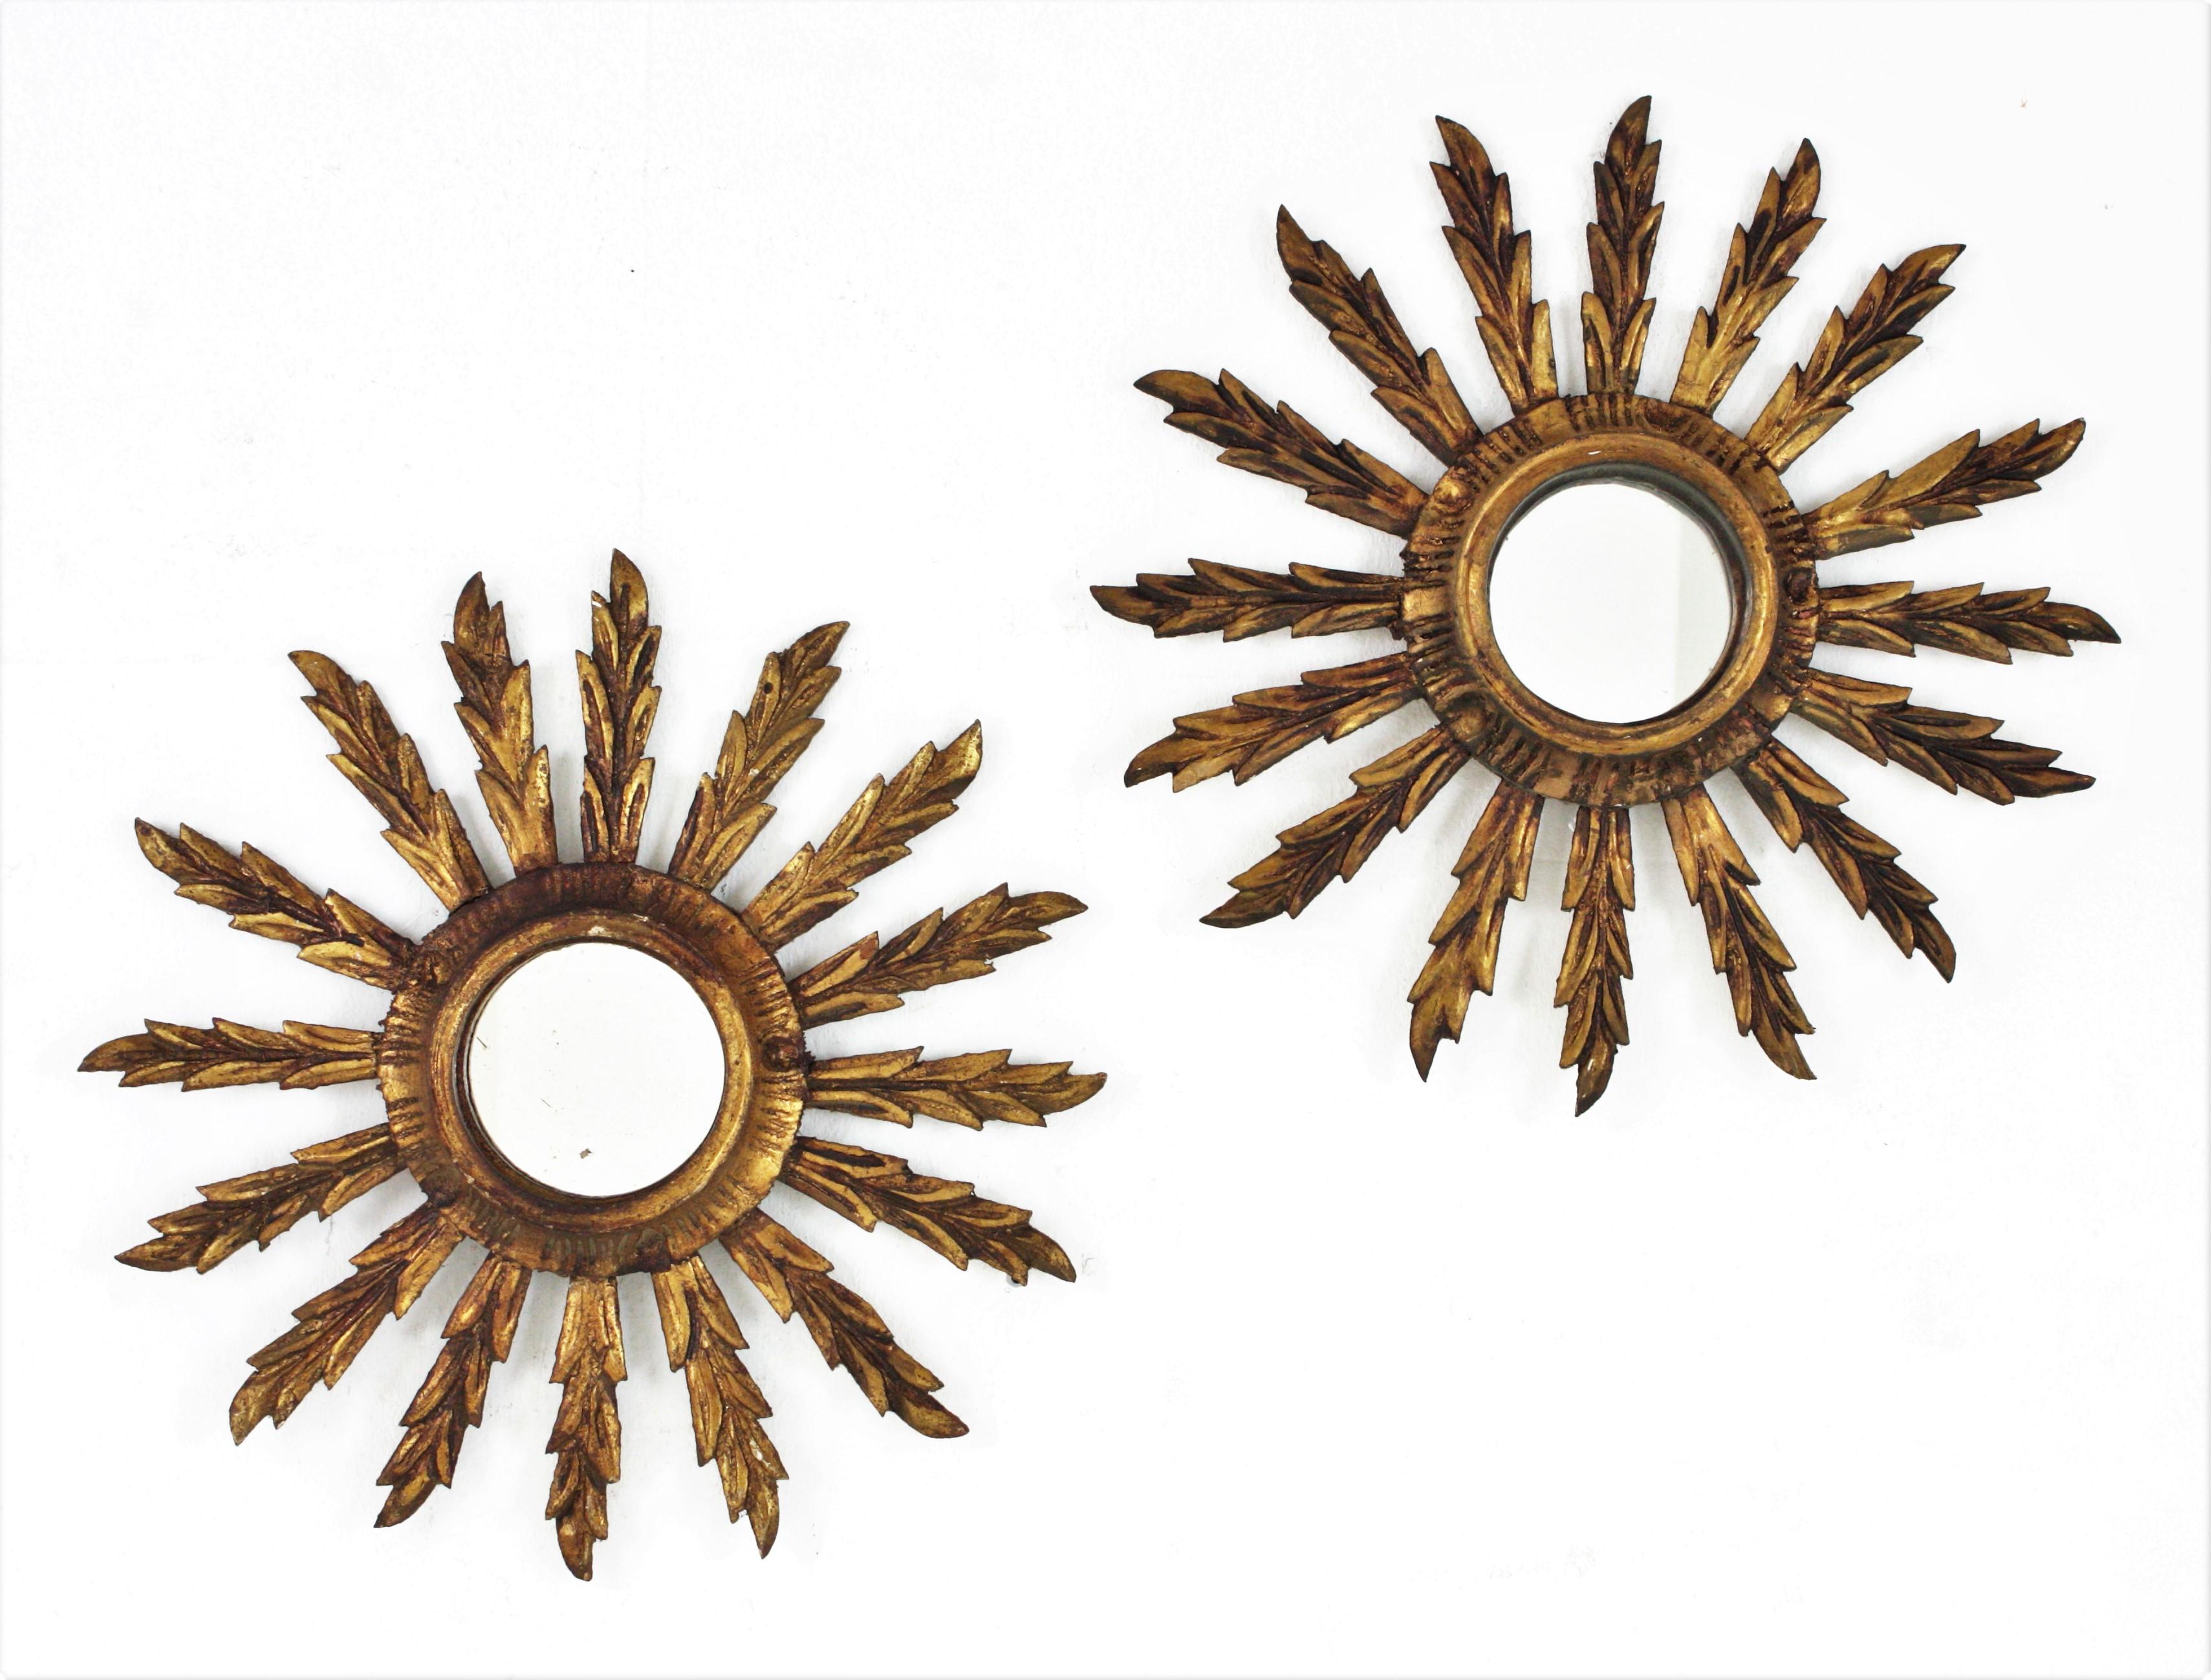 Spanish Giltwood sunburst mirrors in Small Scale, Spain, 1930s-1940.
Beautiful pair of sunburst mirrors in this unusual mini size and Baroque style. Carved wood covered with gesso and gold leaf finish.
Terrific age patina. 
Slightly difference in